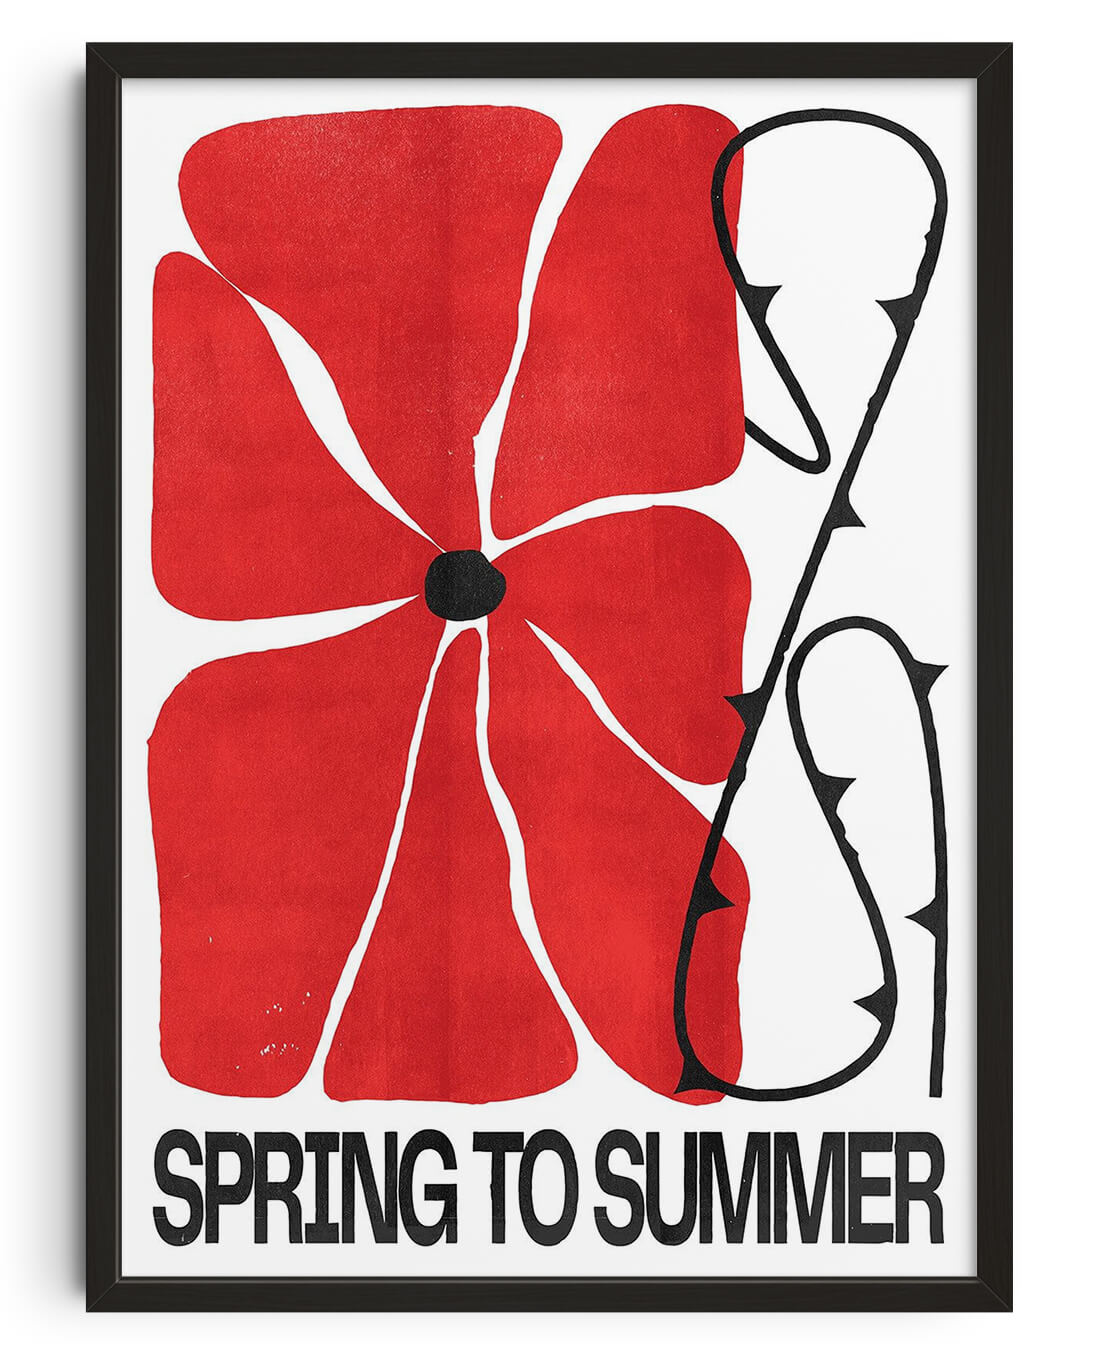 Spring to Summer contemporary wall art print by Alexander Khabbazi - sold by DROOL